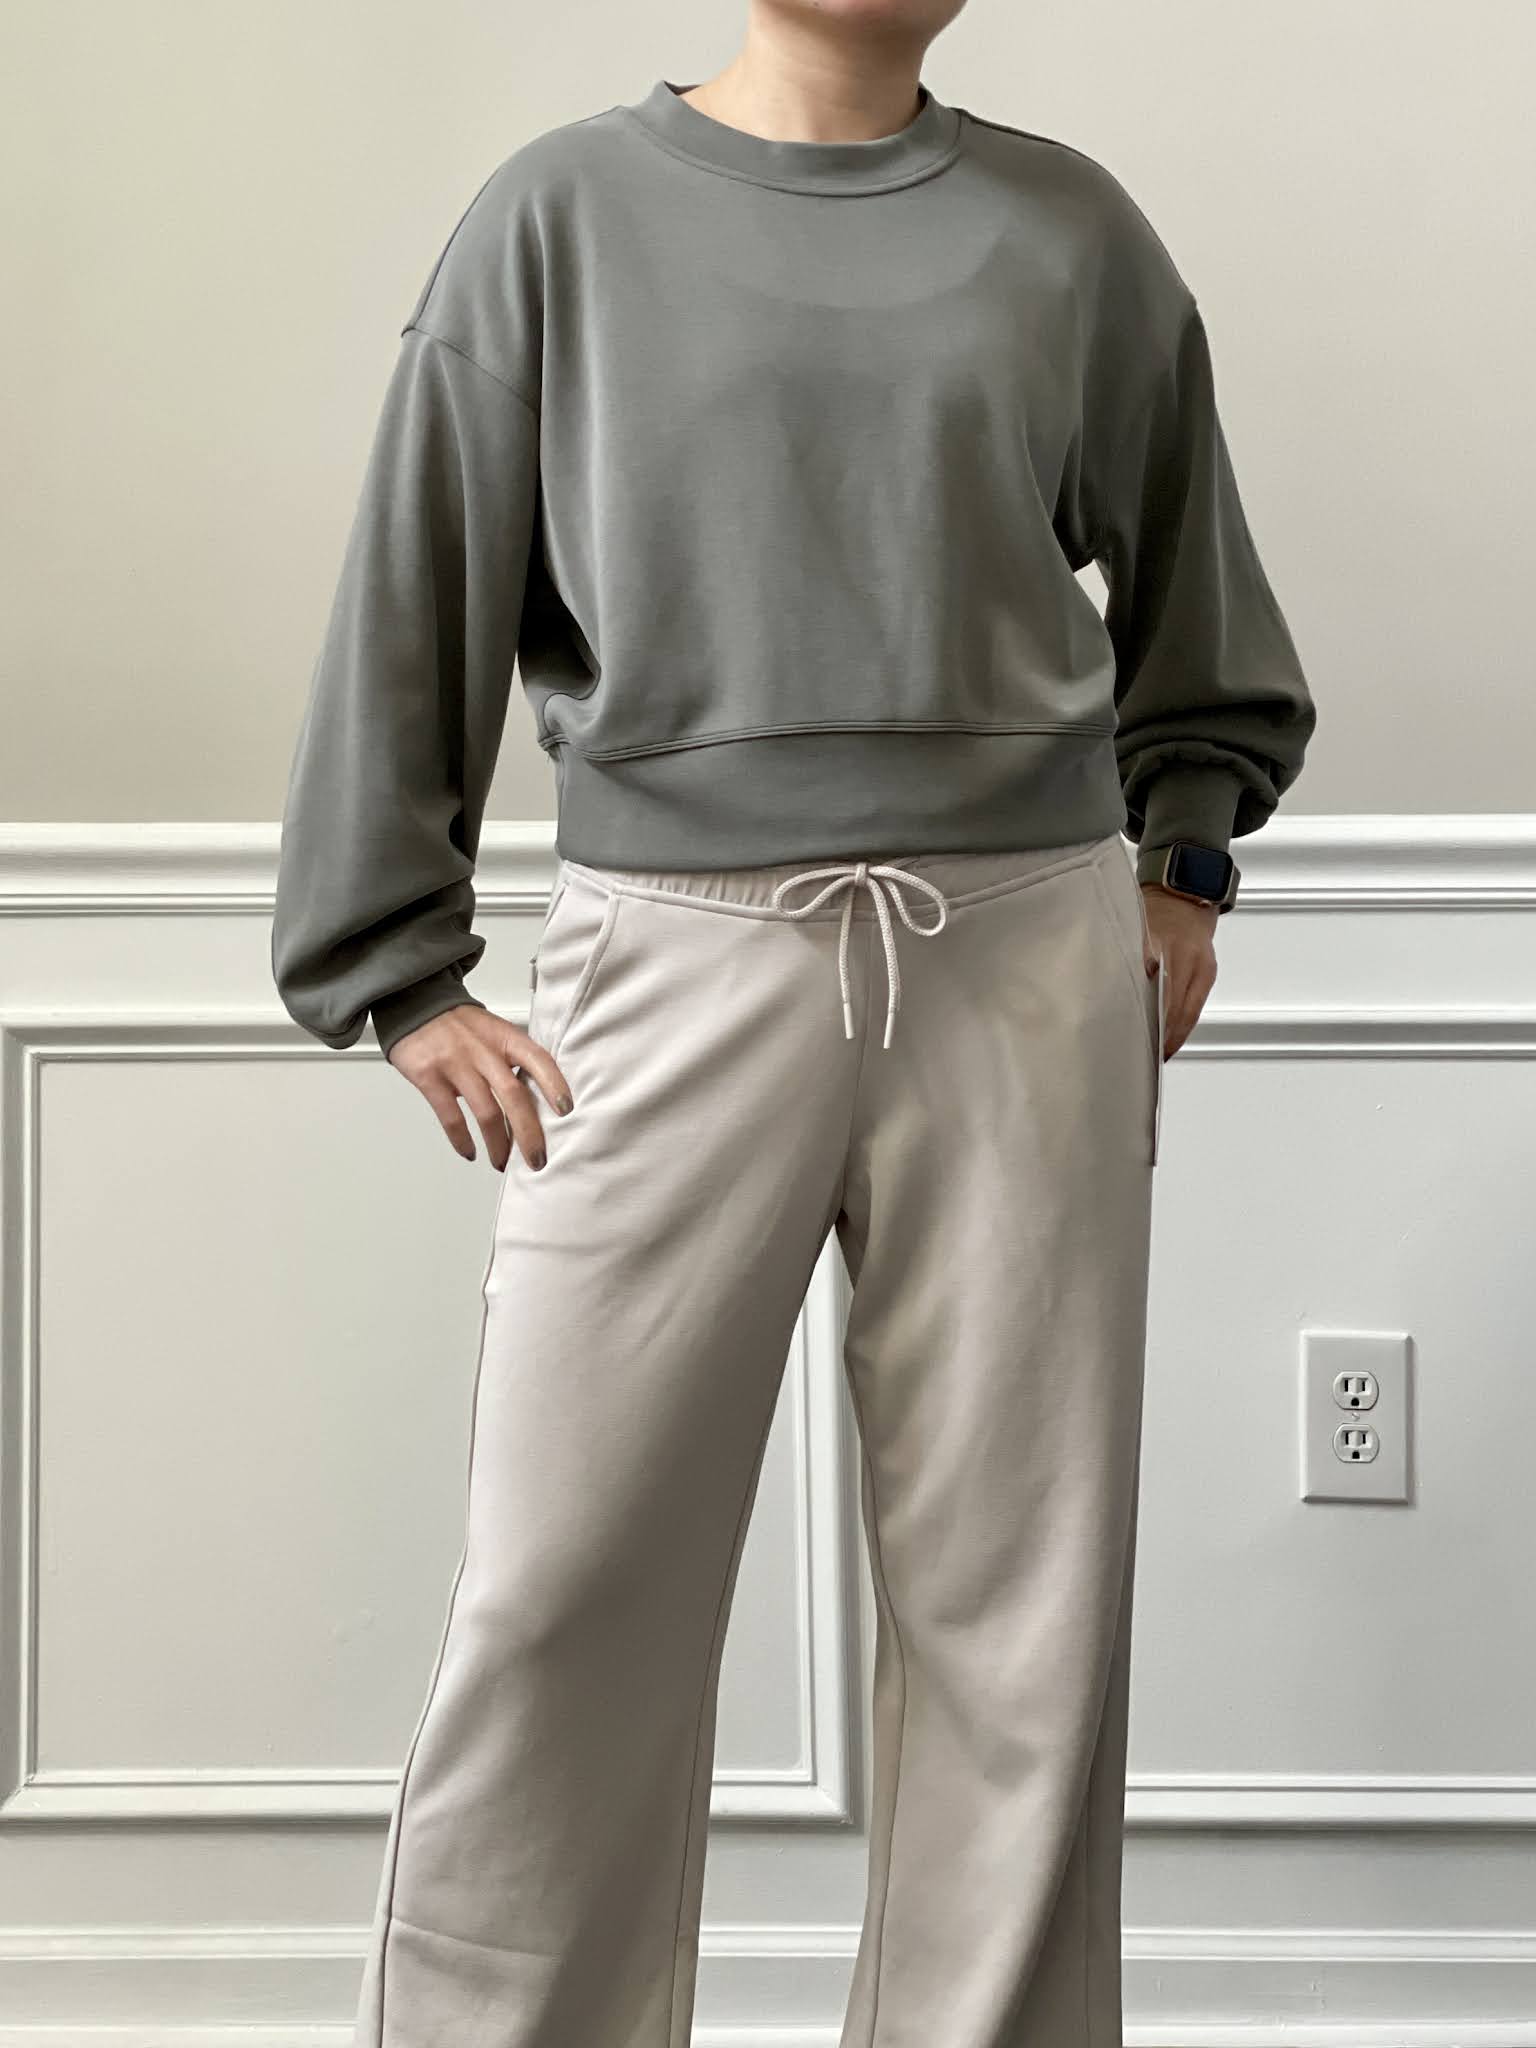 Vuori Loungewear Review: a Capsule Travel Wardrobe You Can Mix and